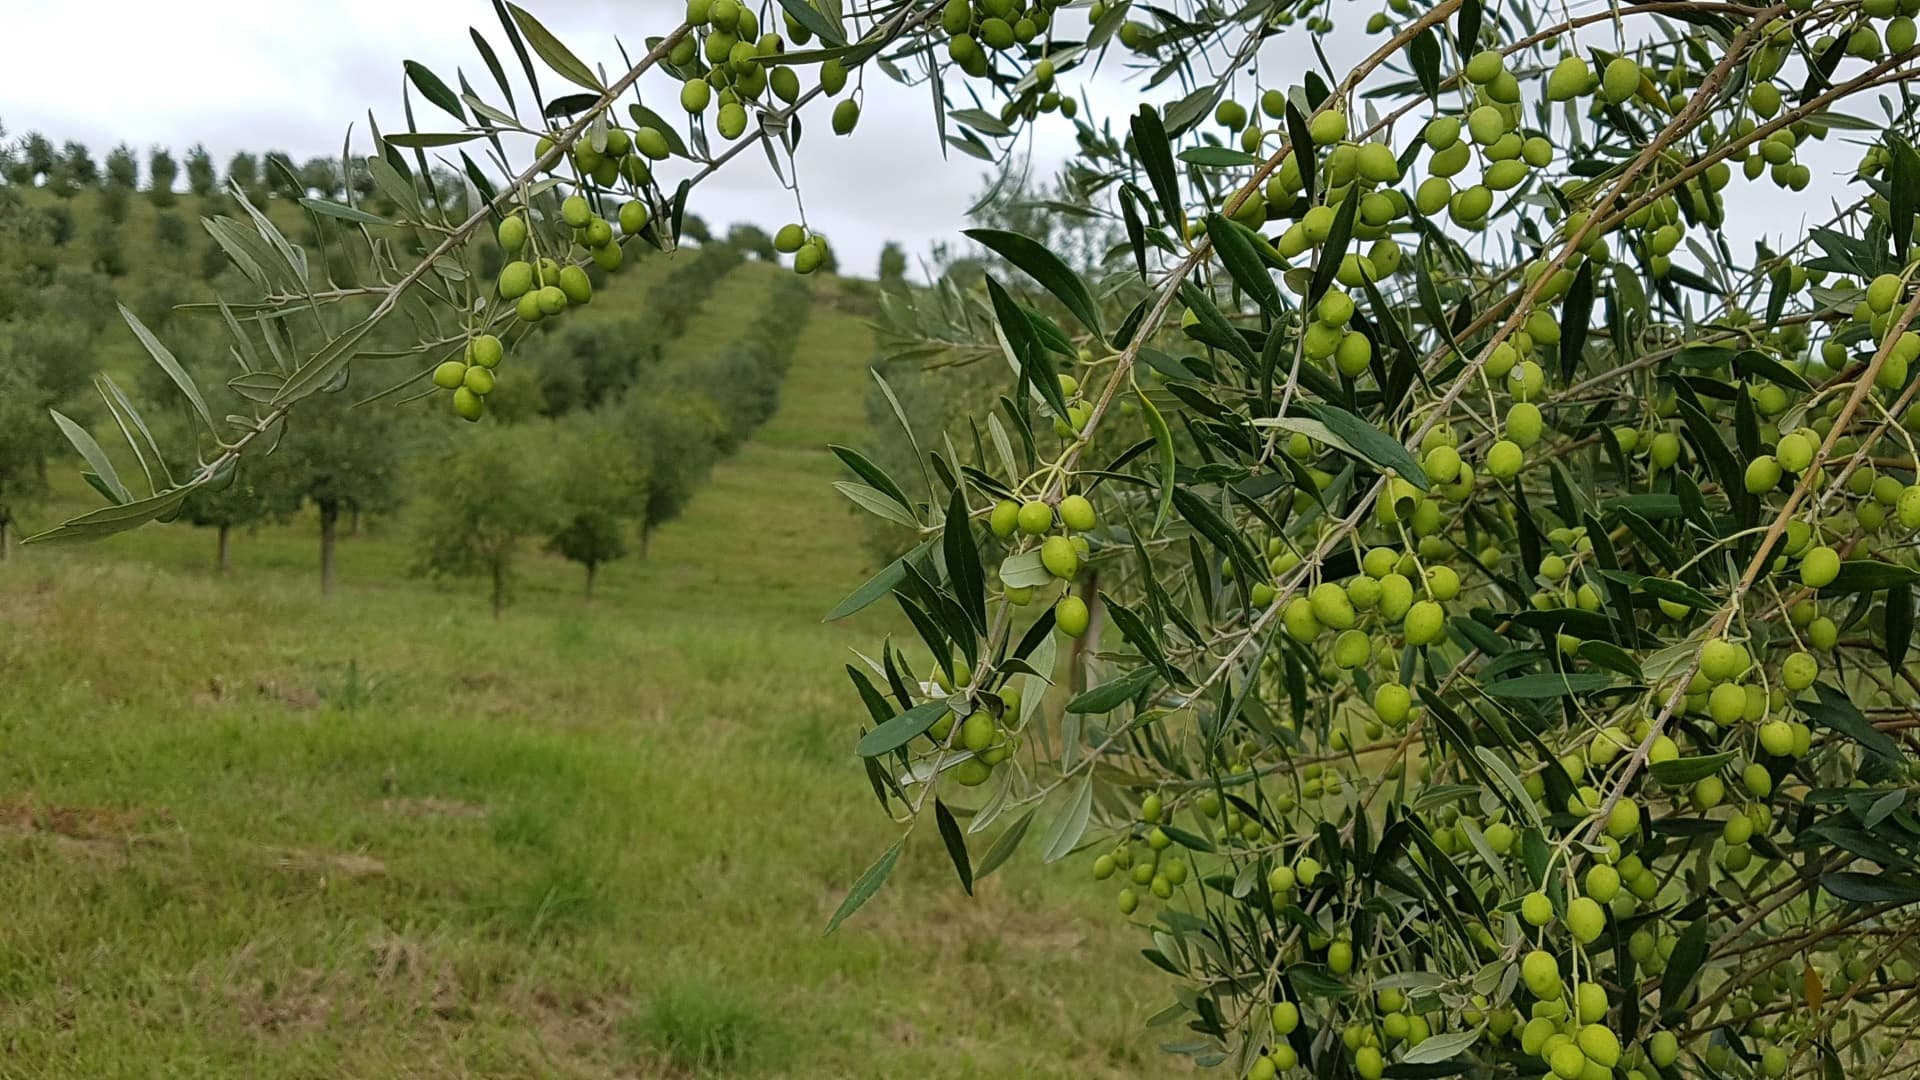 south-america-profiles-production-in-rio-grande-do-sul-awardwinning-production-means-preparing-for-the-unexpected-olive-oil-times